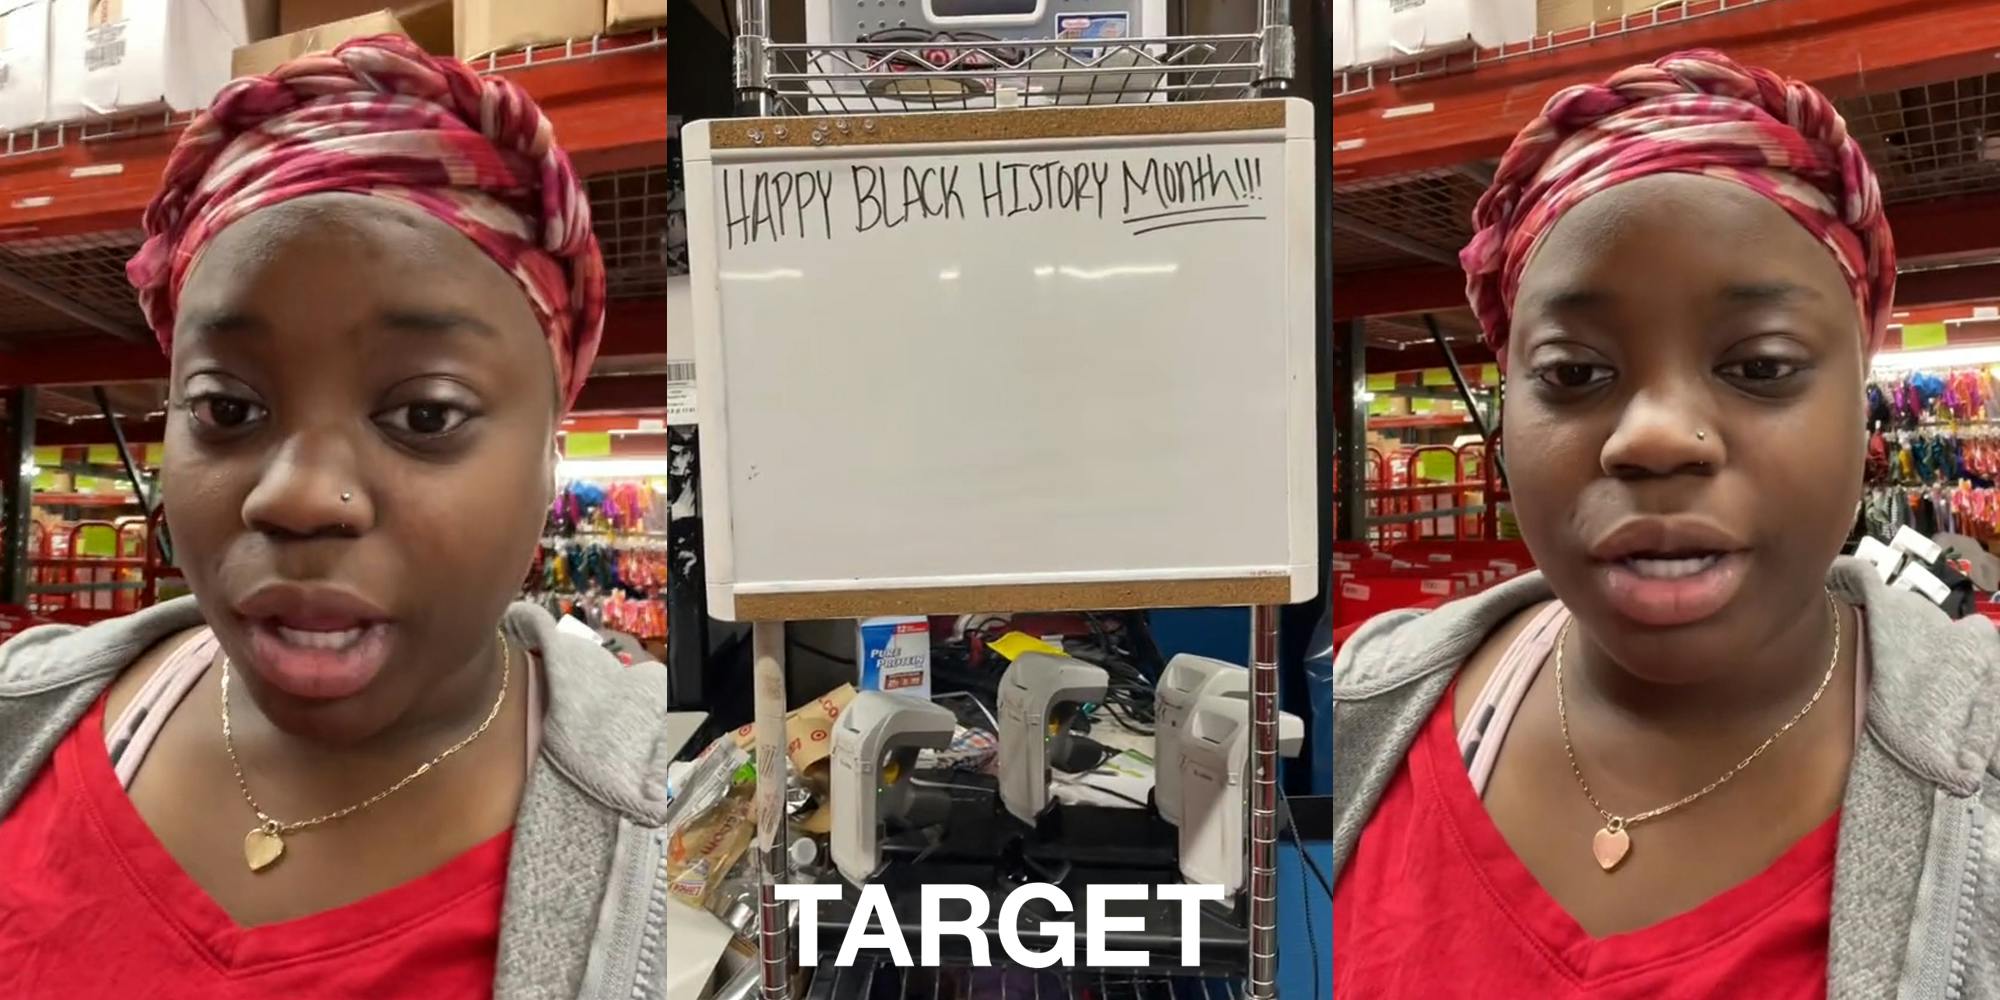 Target employee speaking (l) whiteboard in Target with writing "HAPPY BLACK HISTORY MONTH!!!" and Target logo at bottom (c) Target employee speaking (r)